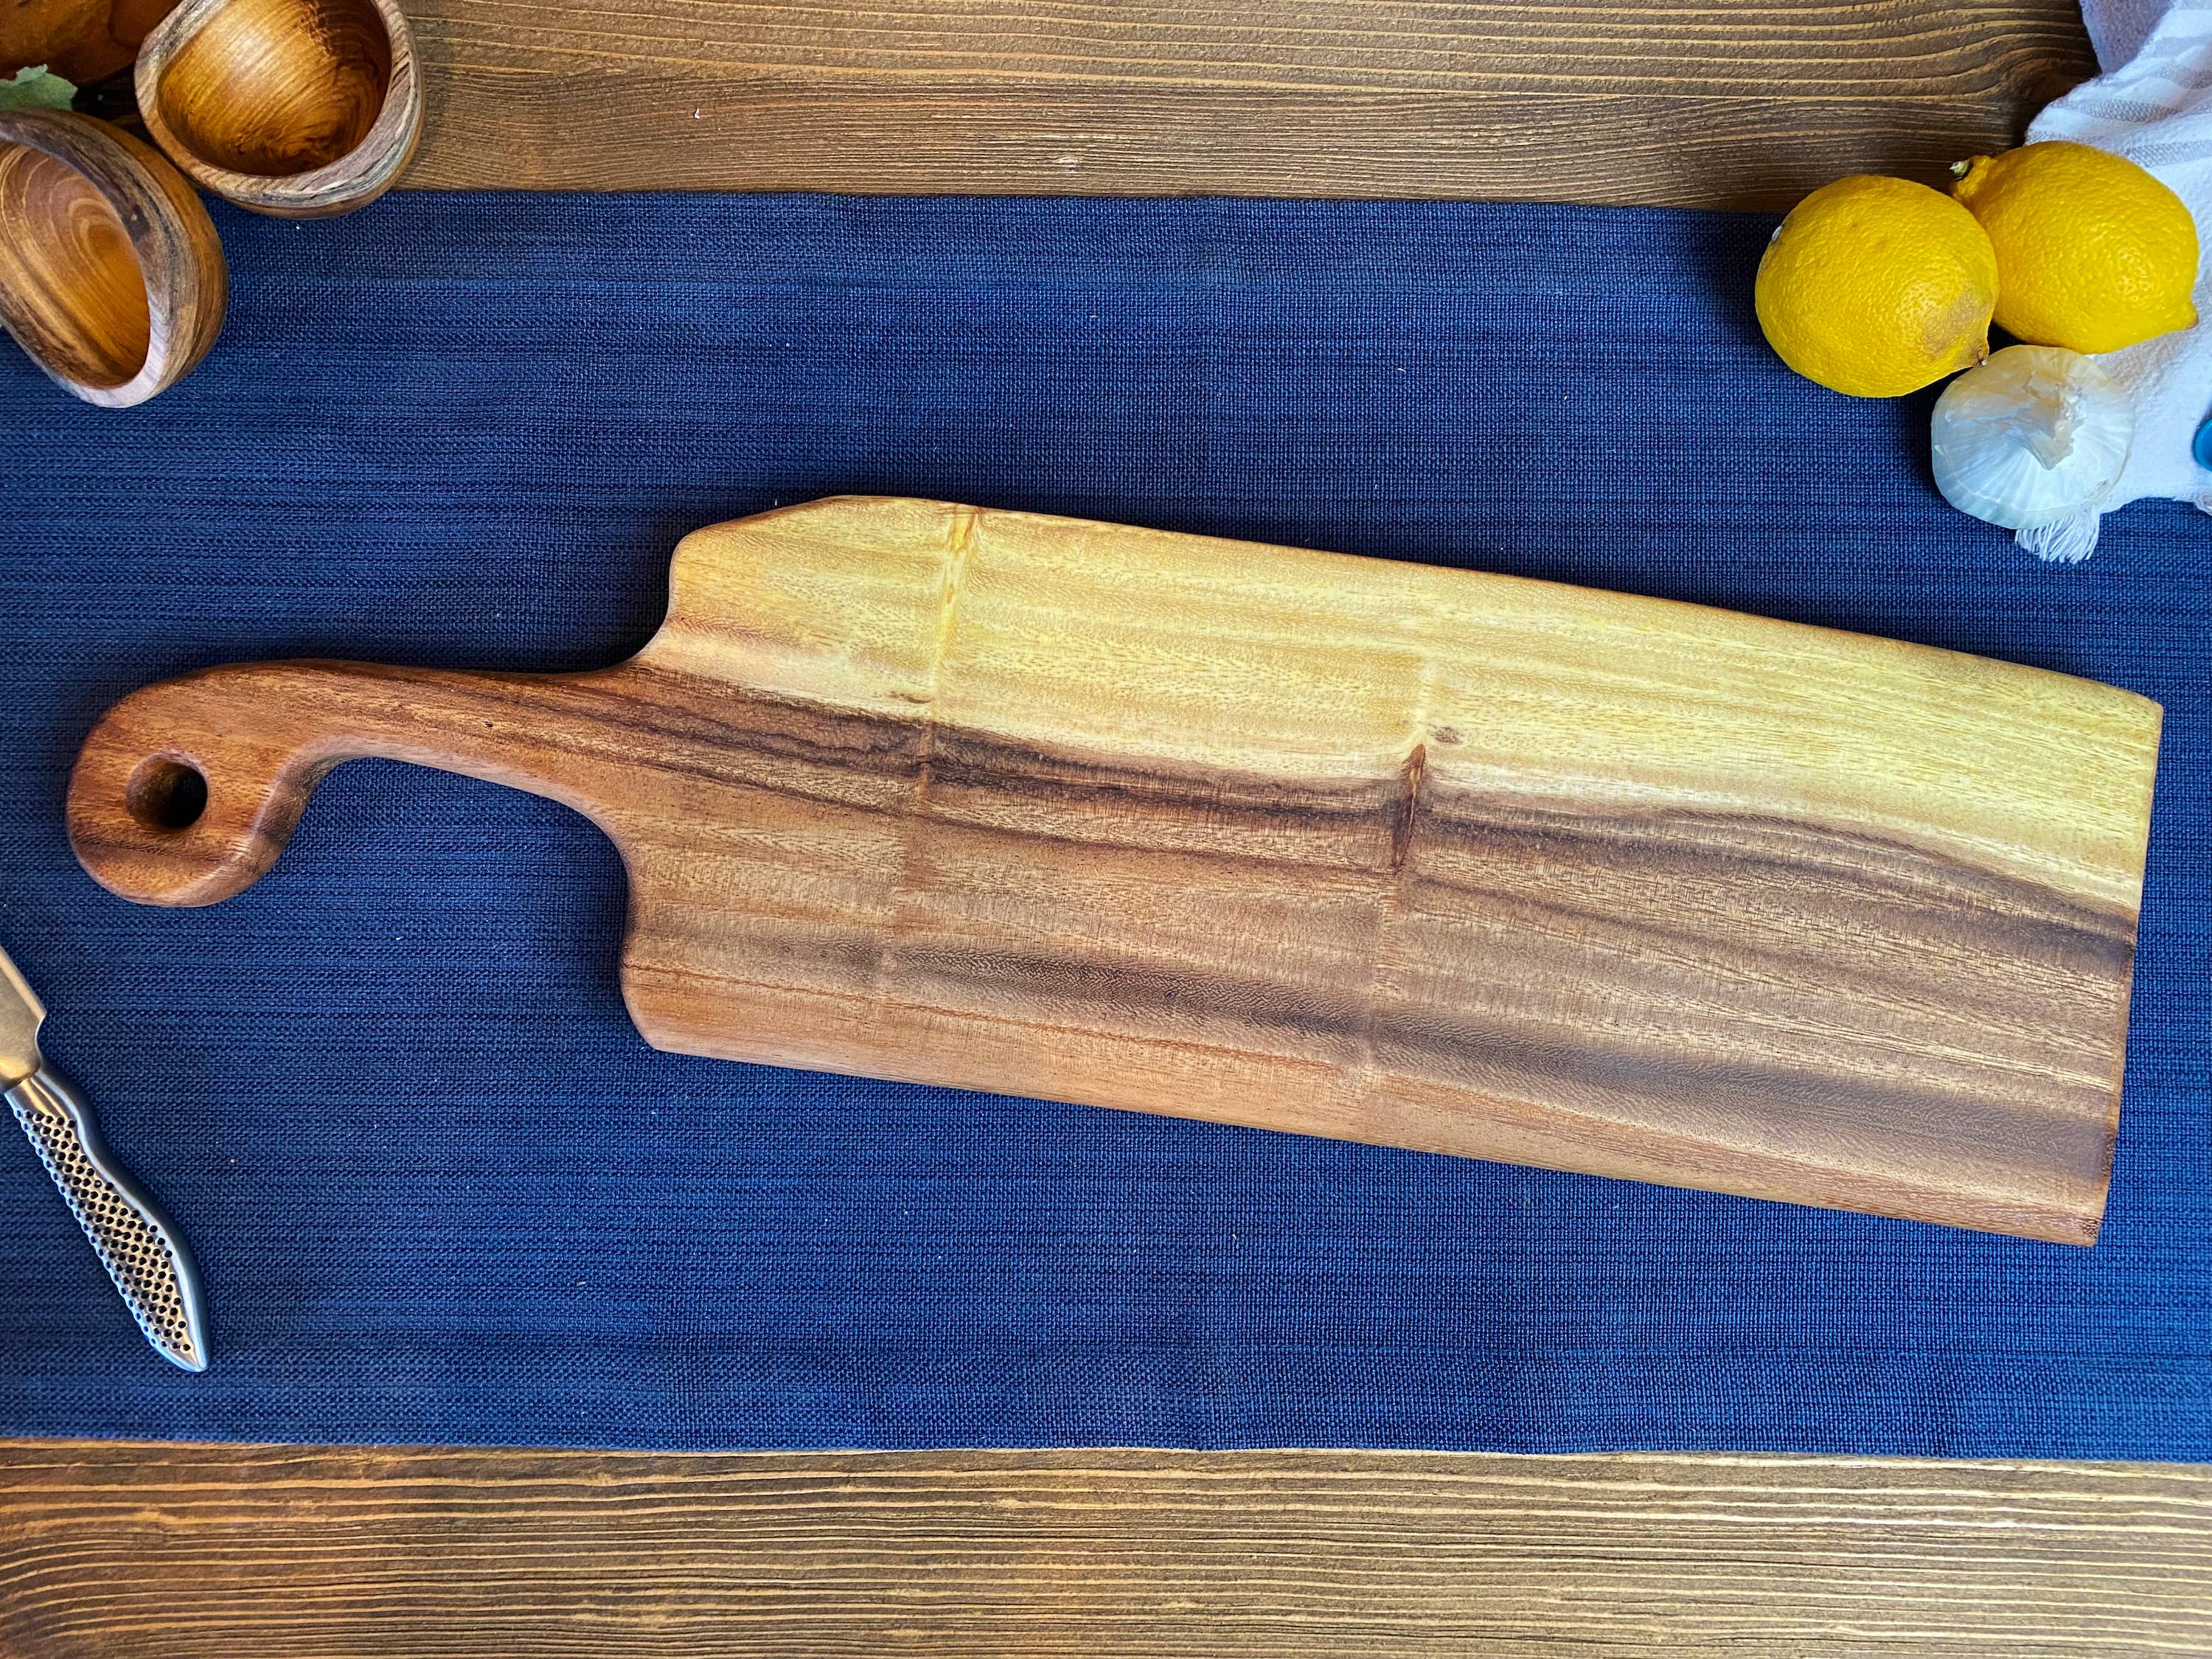 22" x 6" x 1" Live Edge Bread/Appetizer Board with Handle